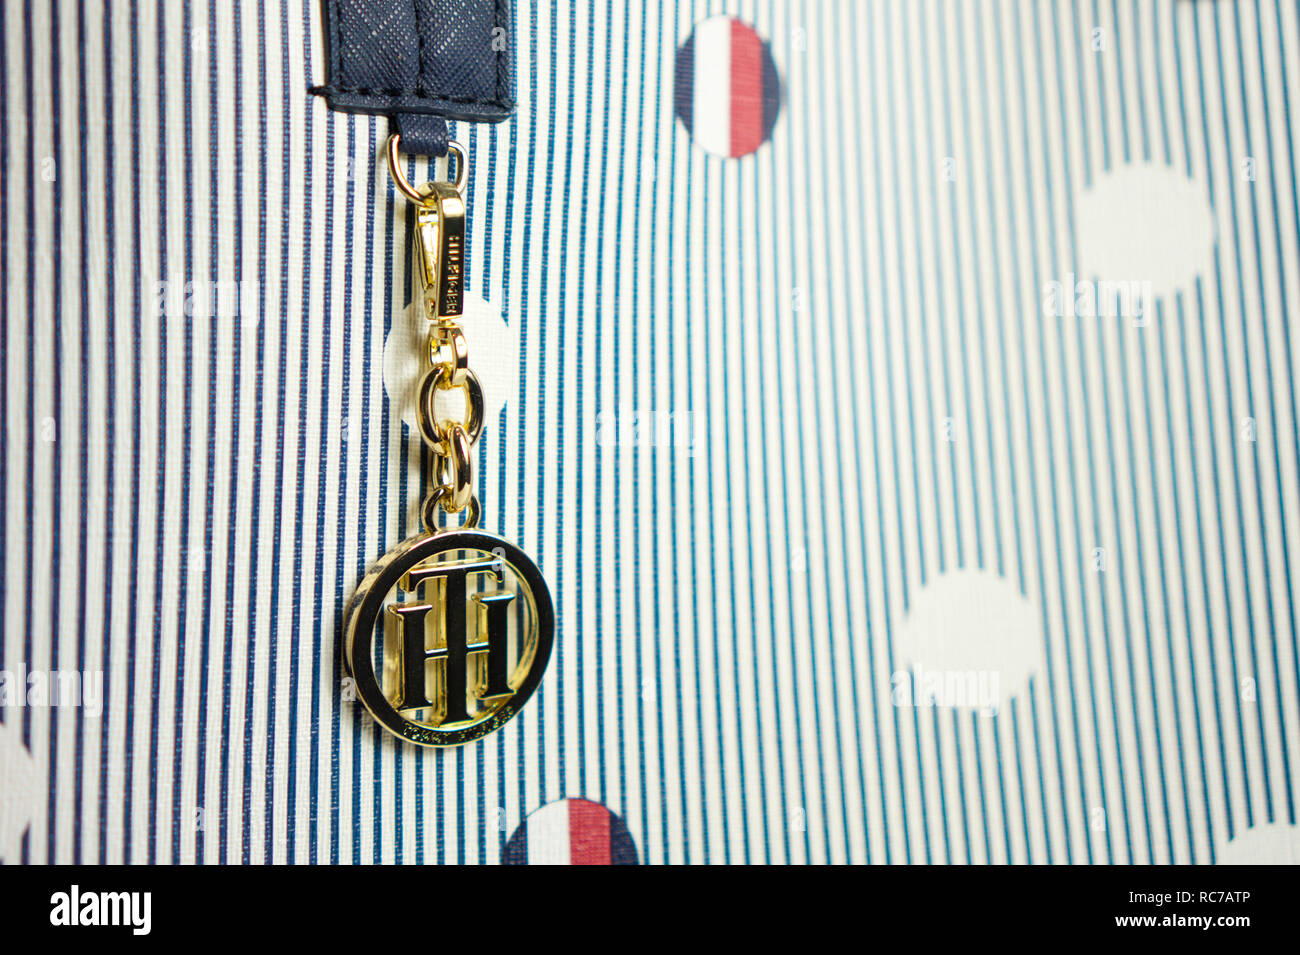 Tanakajd, Hungary - 01. 13. 2019: close up picture of a bag with tommy  hilfiger hanger decoration and colors Stock Photo - Alamy